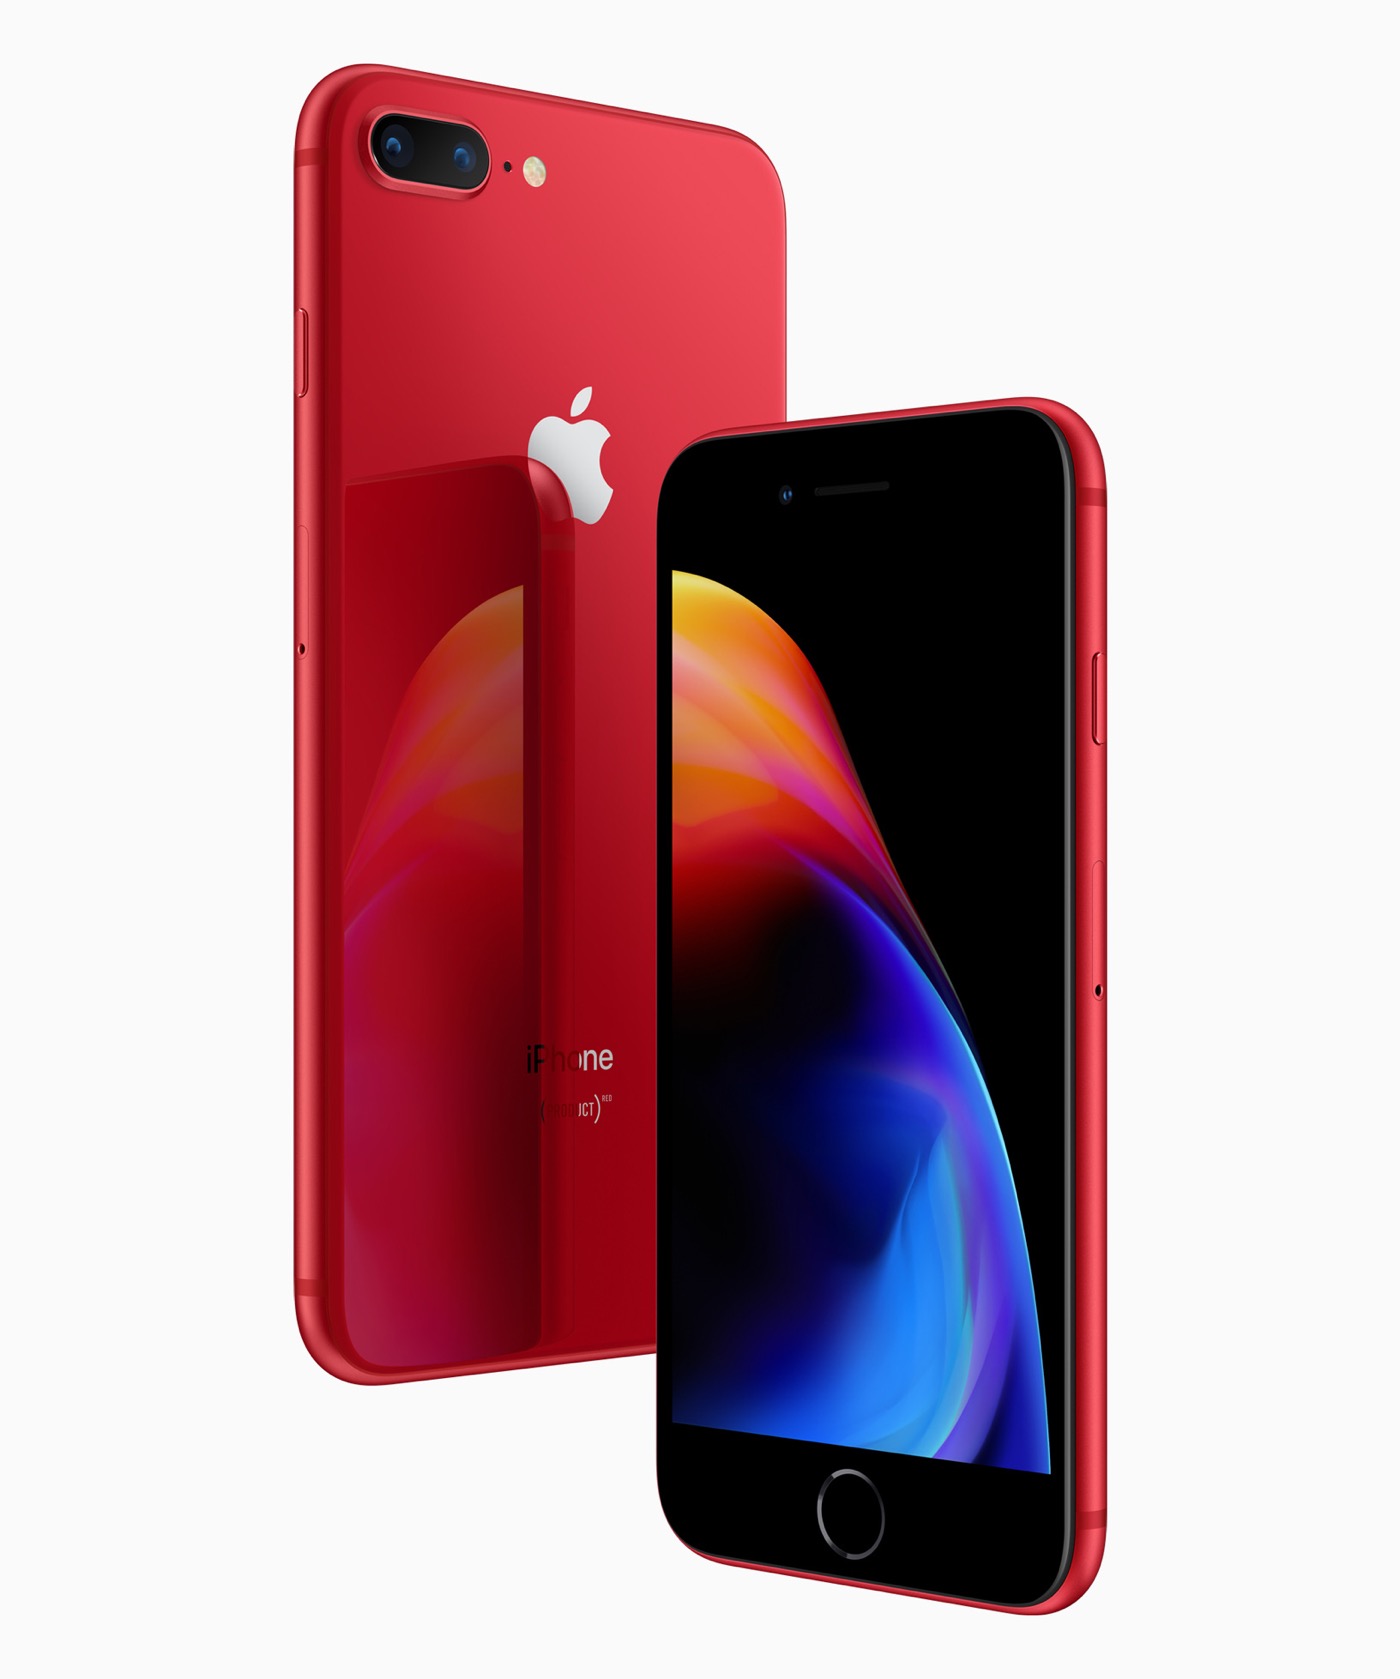 Apple、｢iPhone 8/8 Plus｣の｢(PRODUCT) RED｣モデルを発表 ｰ 注文受付は4月10日から開始